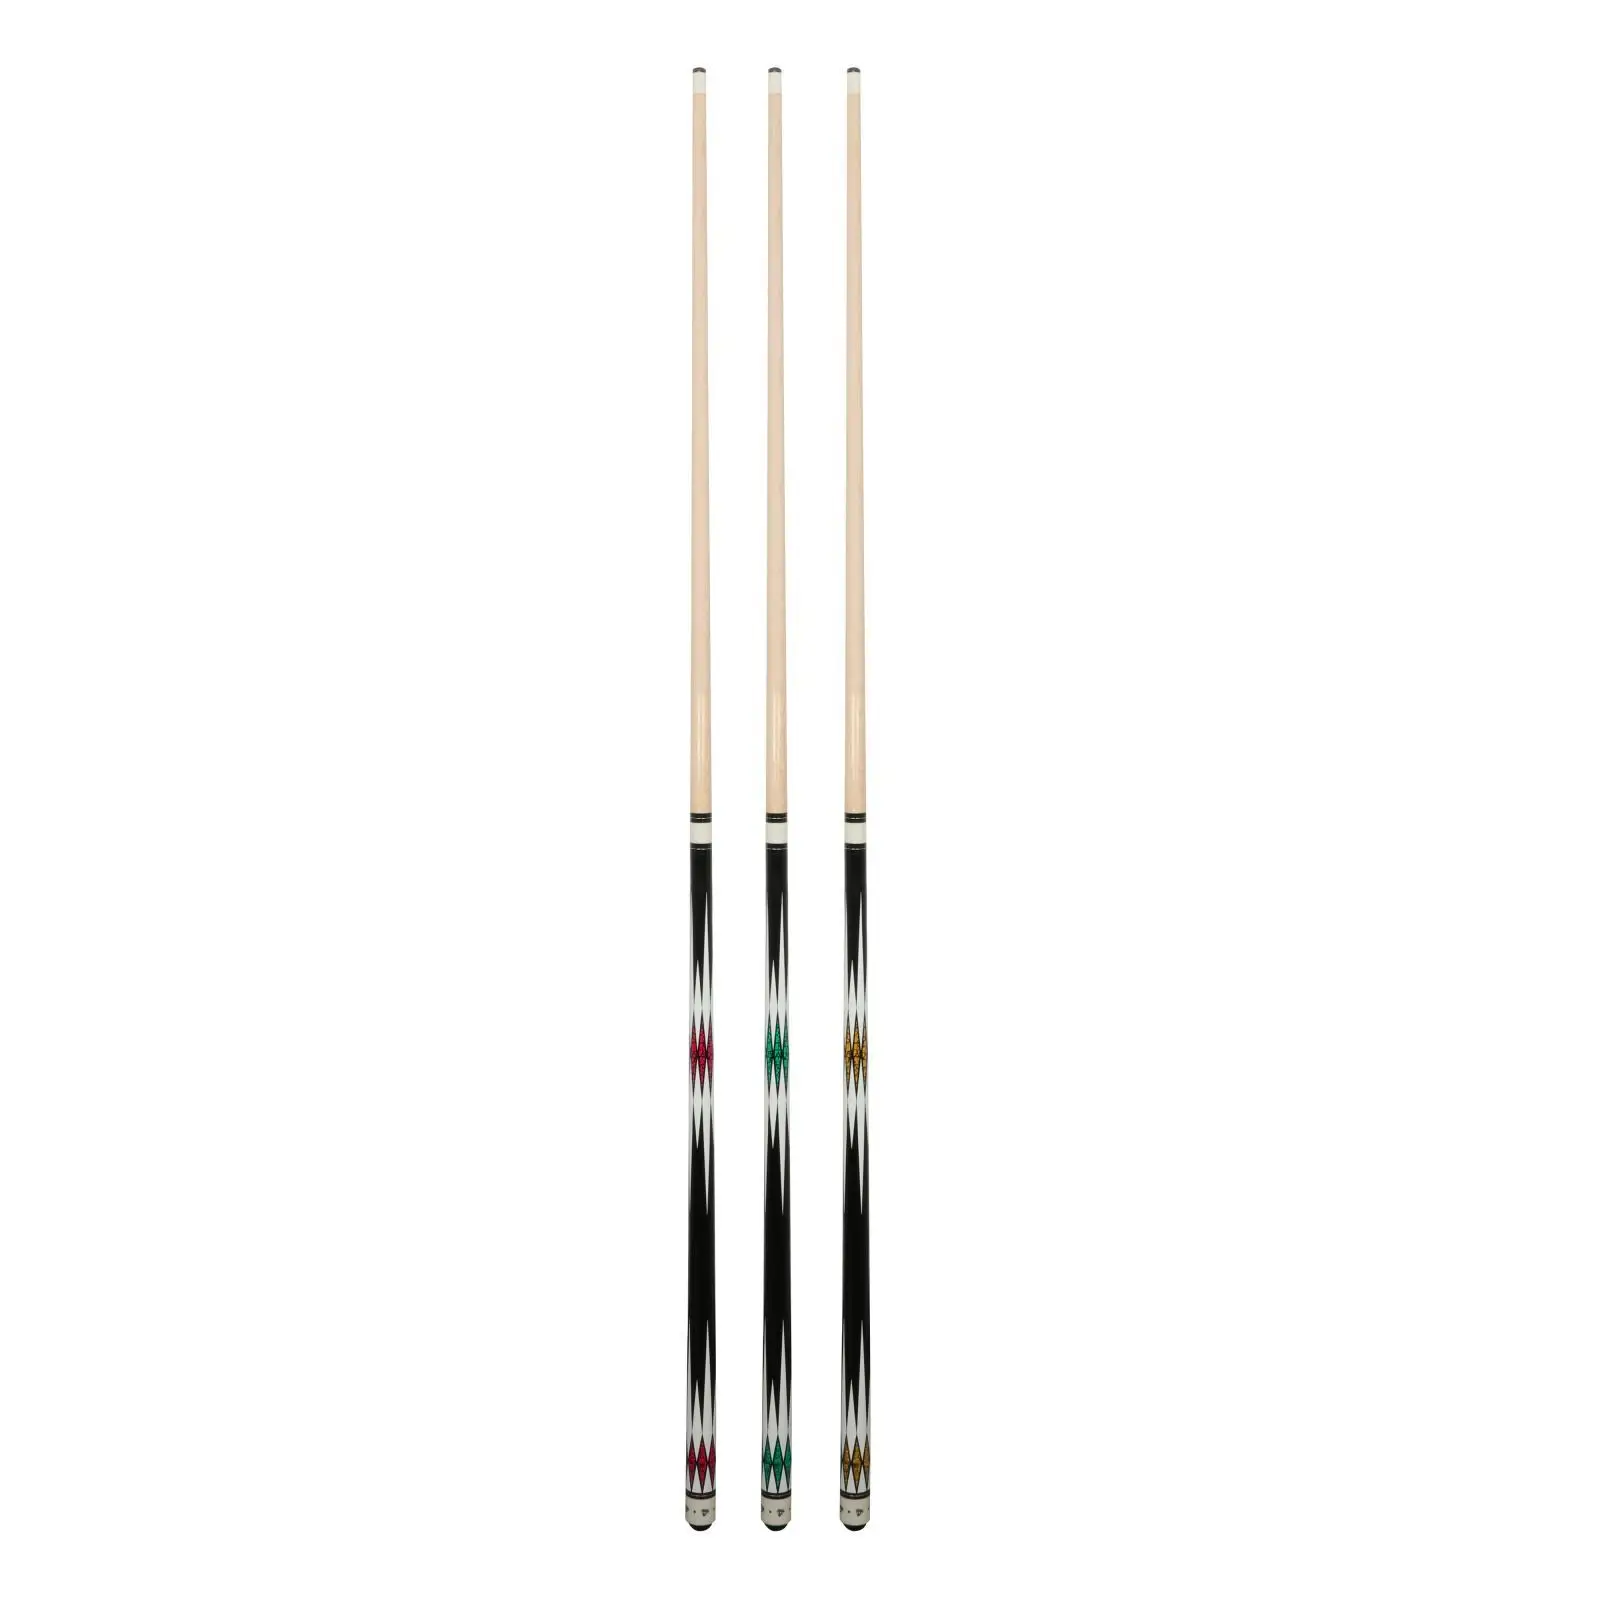 Pool Cue Sticks with Carrying Bag Two Section Full Size 57 inch British Snooker Cue Billiard Cue Sticks for Unisex Women Men